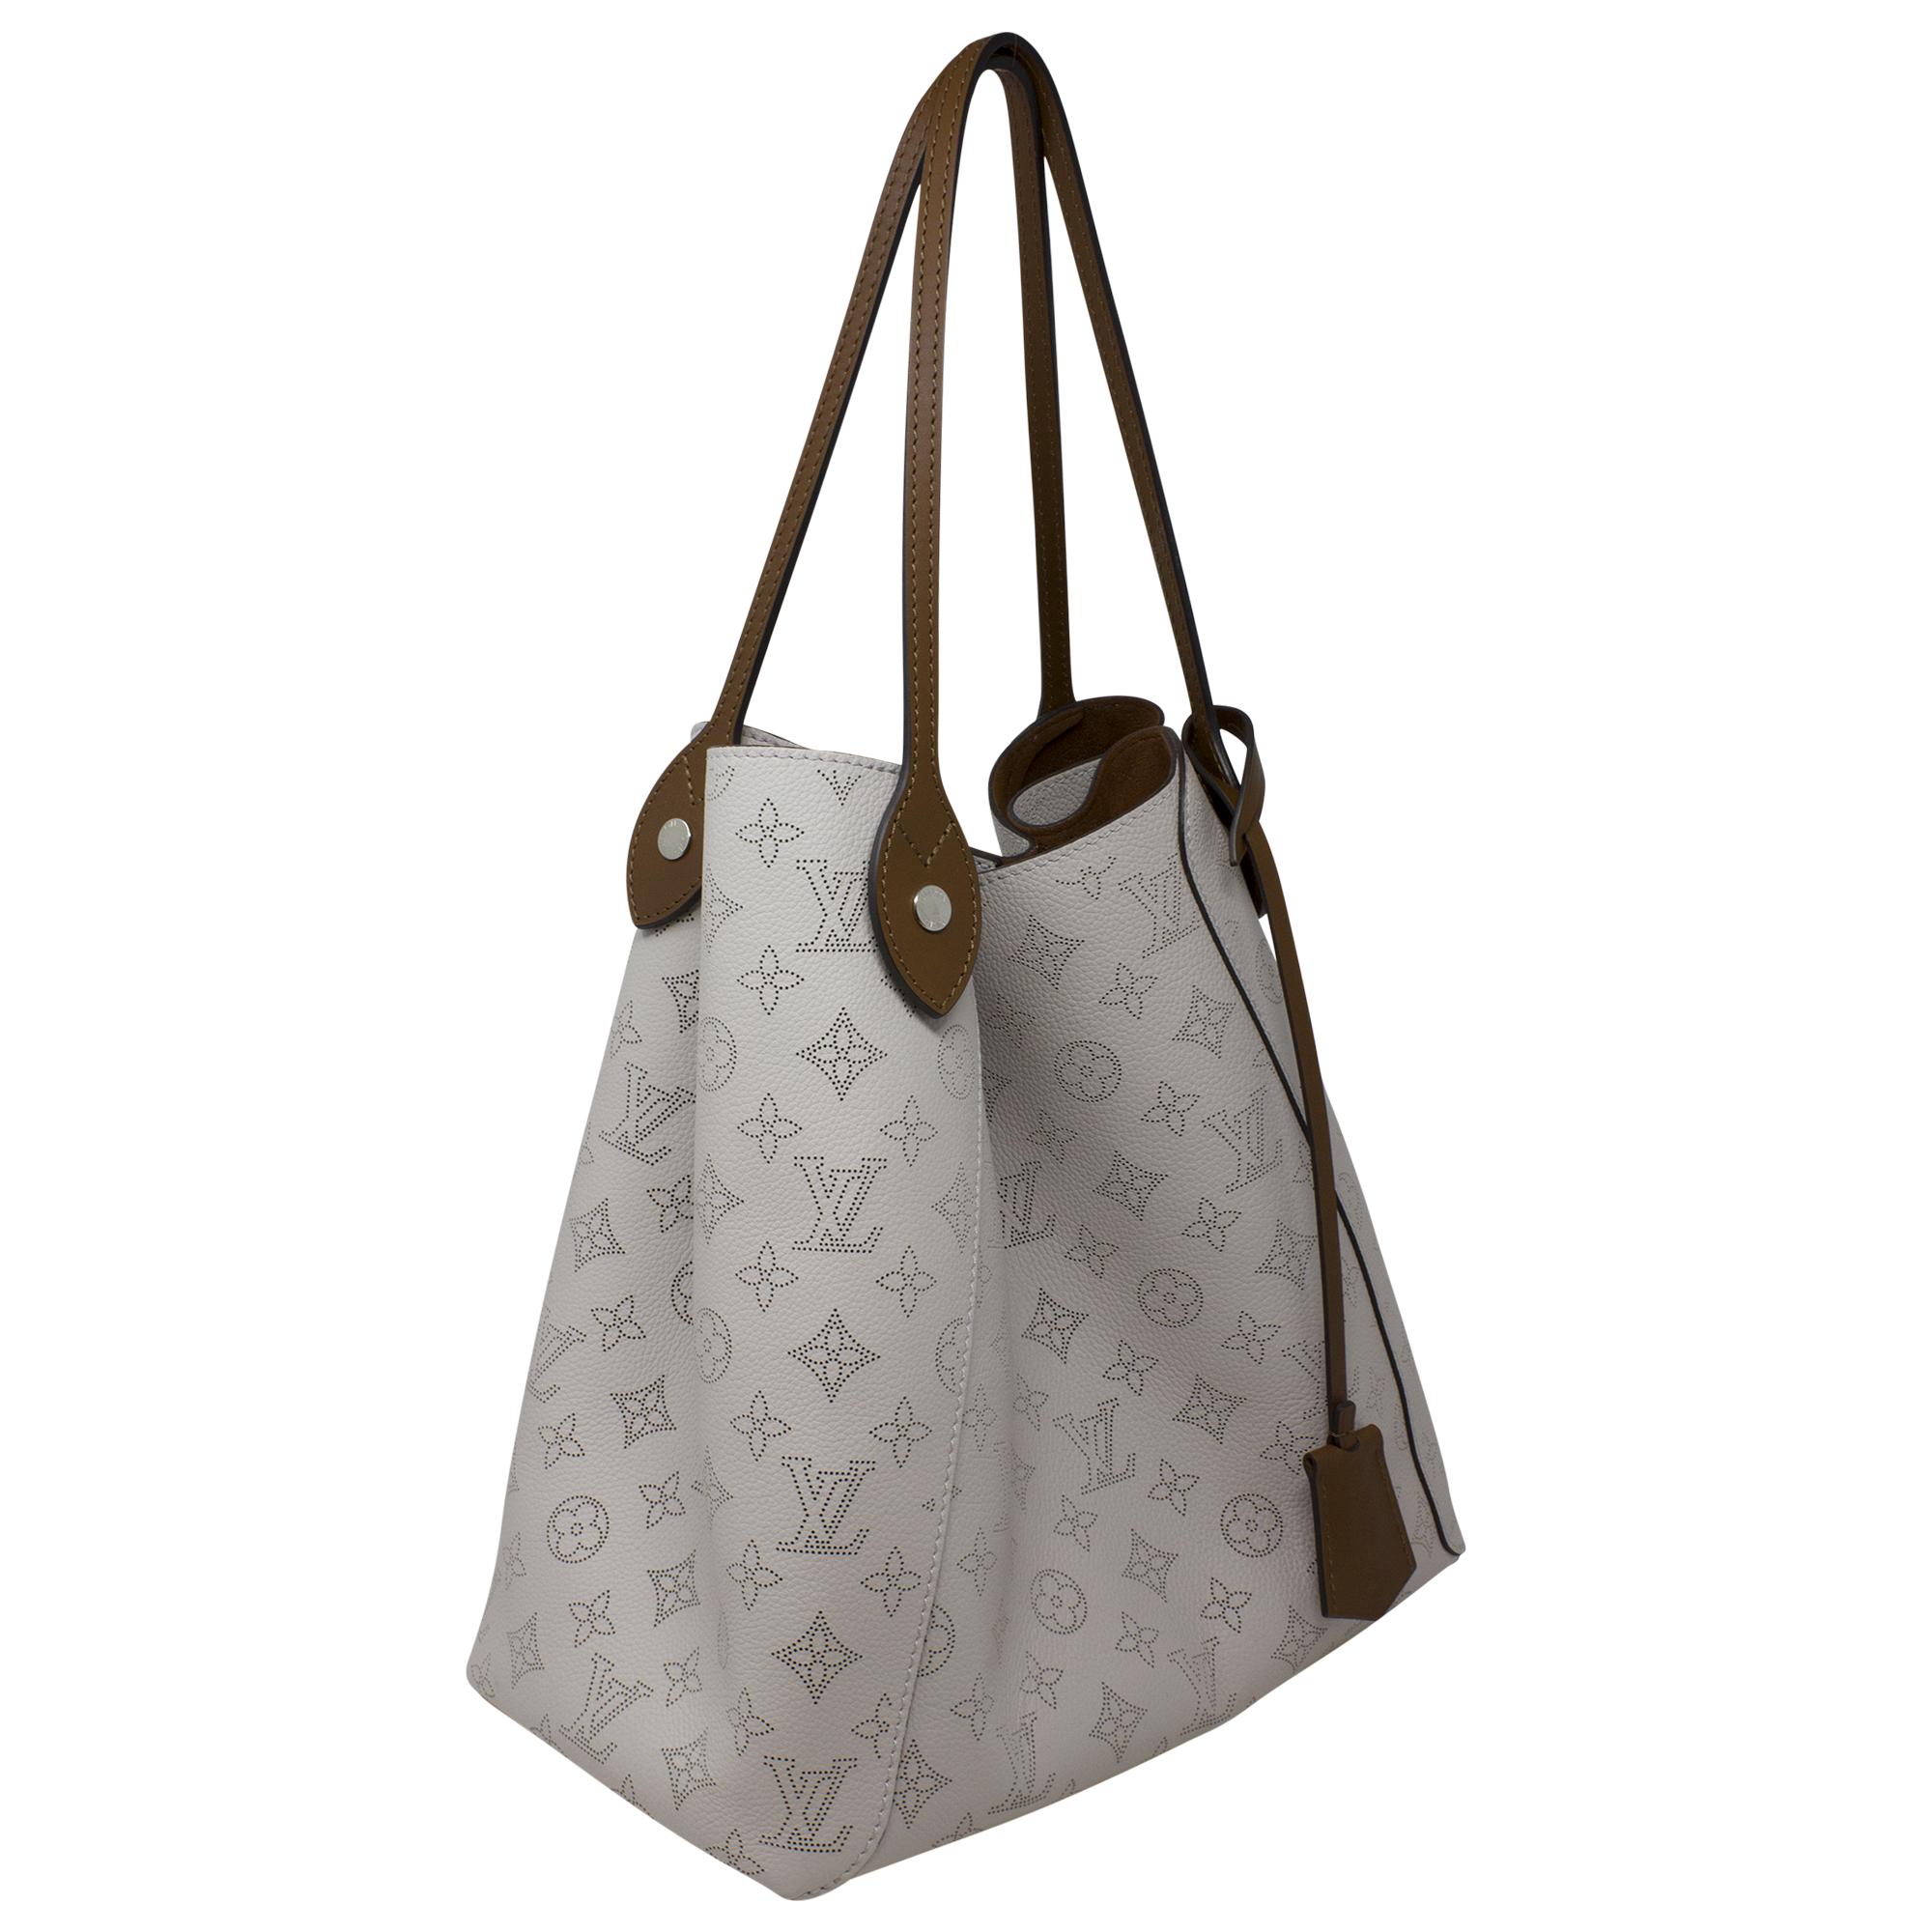 Introducing the Louis Vuitton 2019 Grey Monogram Mahina Hina MM w/ Pouch, a luxurious and versatile accessory for the modern fashionista. Crafted from exquisite grey calfskin leather, this bag showcases Louis Vuitton's iconic Monogram Mahina